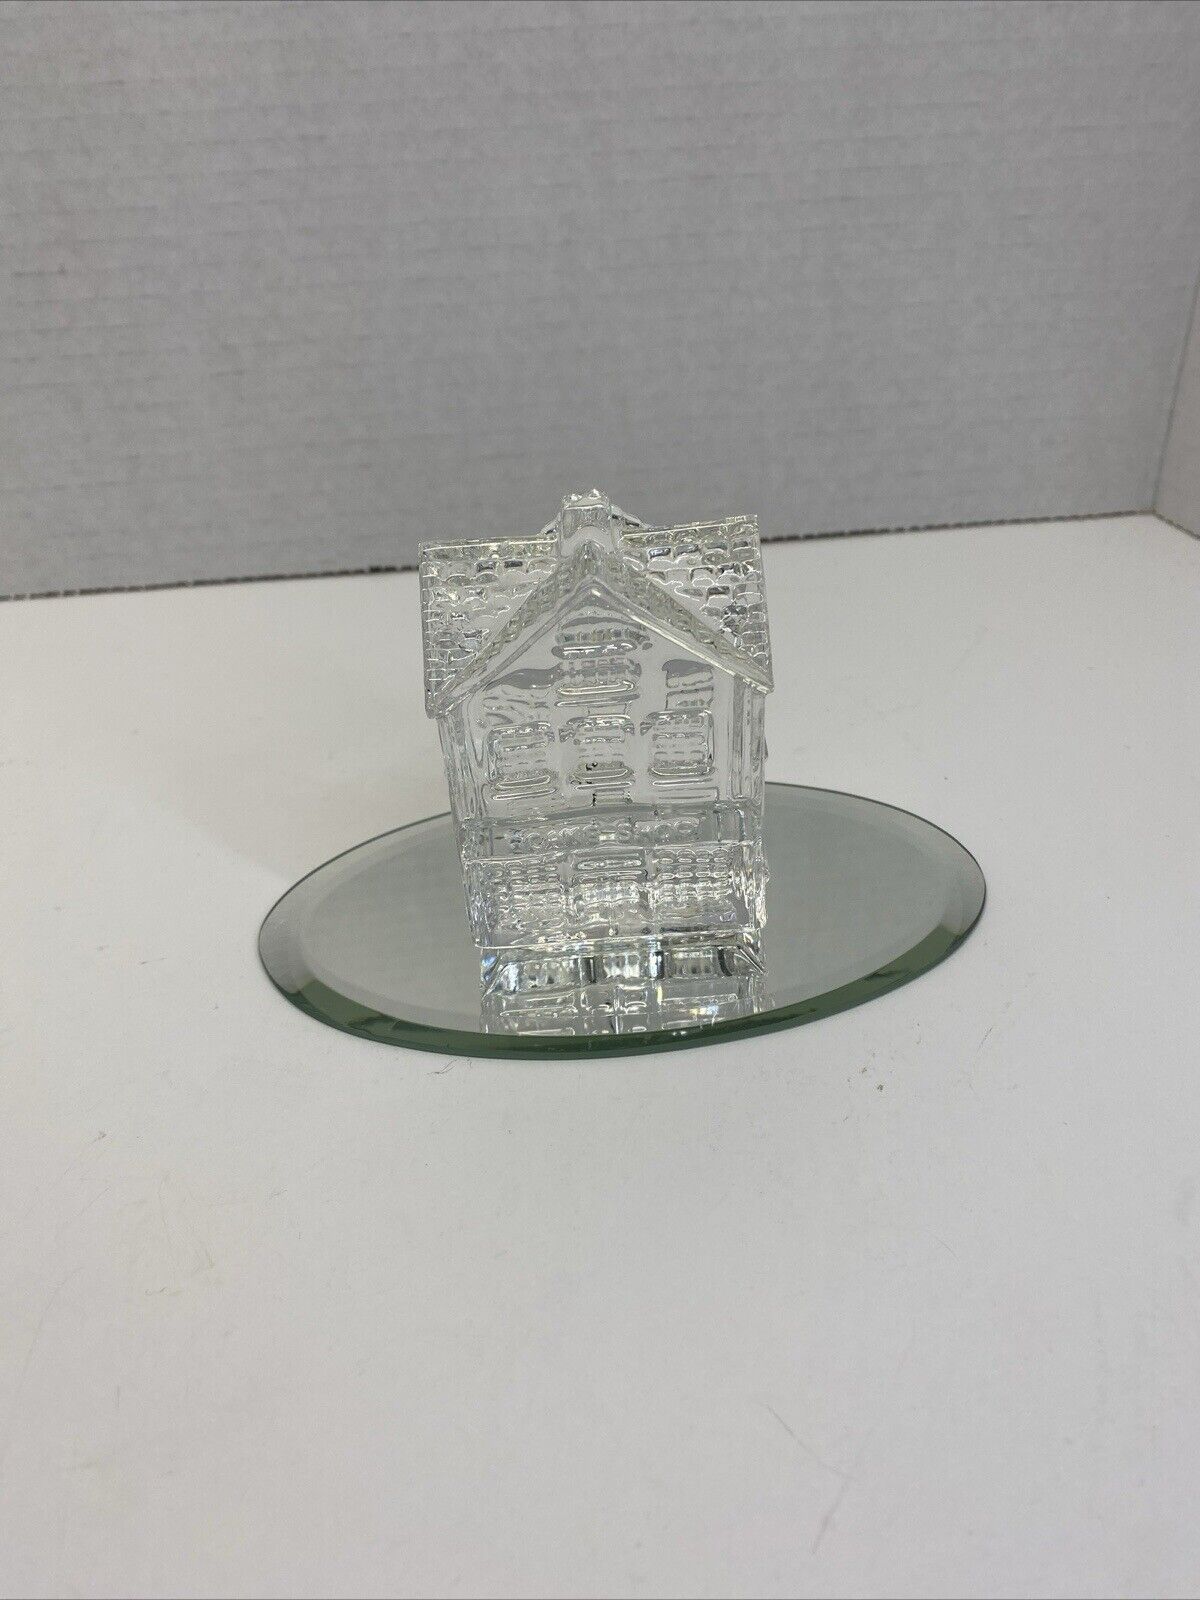 Waterford Crystal Lismore Village Cake Shop Bakery House Paperweight Collectible